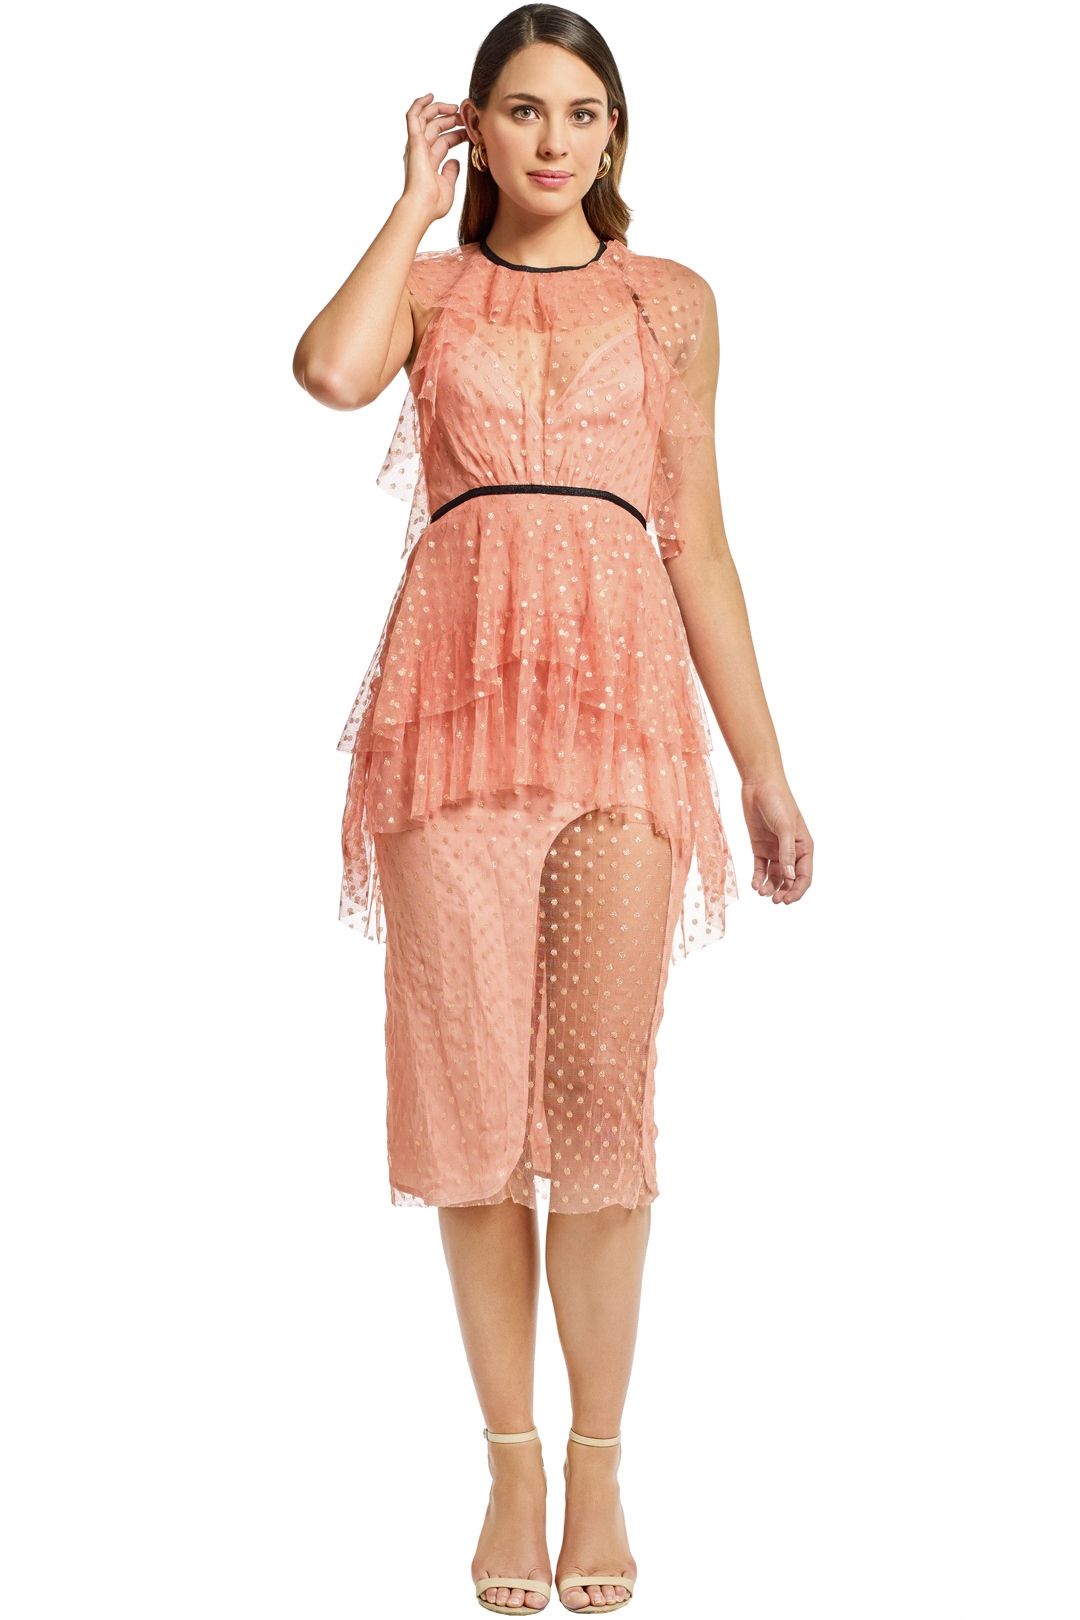 Alice McCall - You and Me Dress - Rose - Front